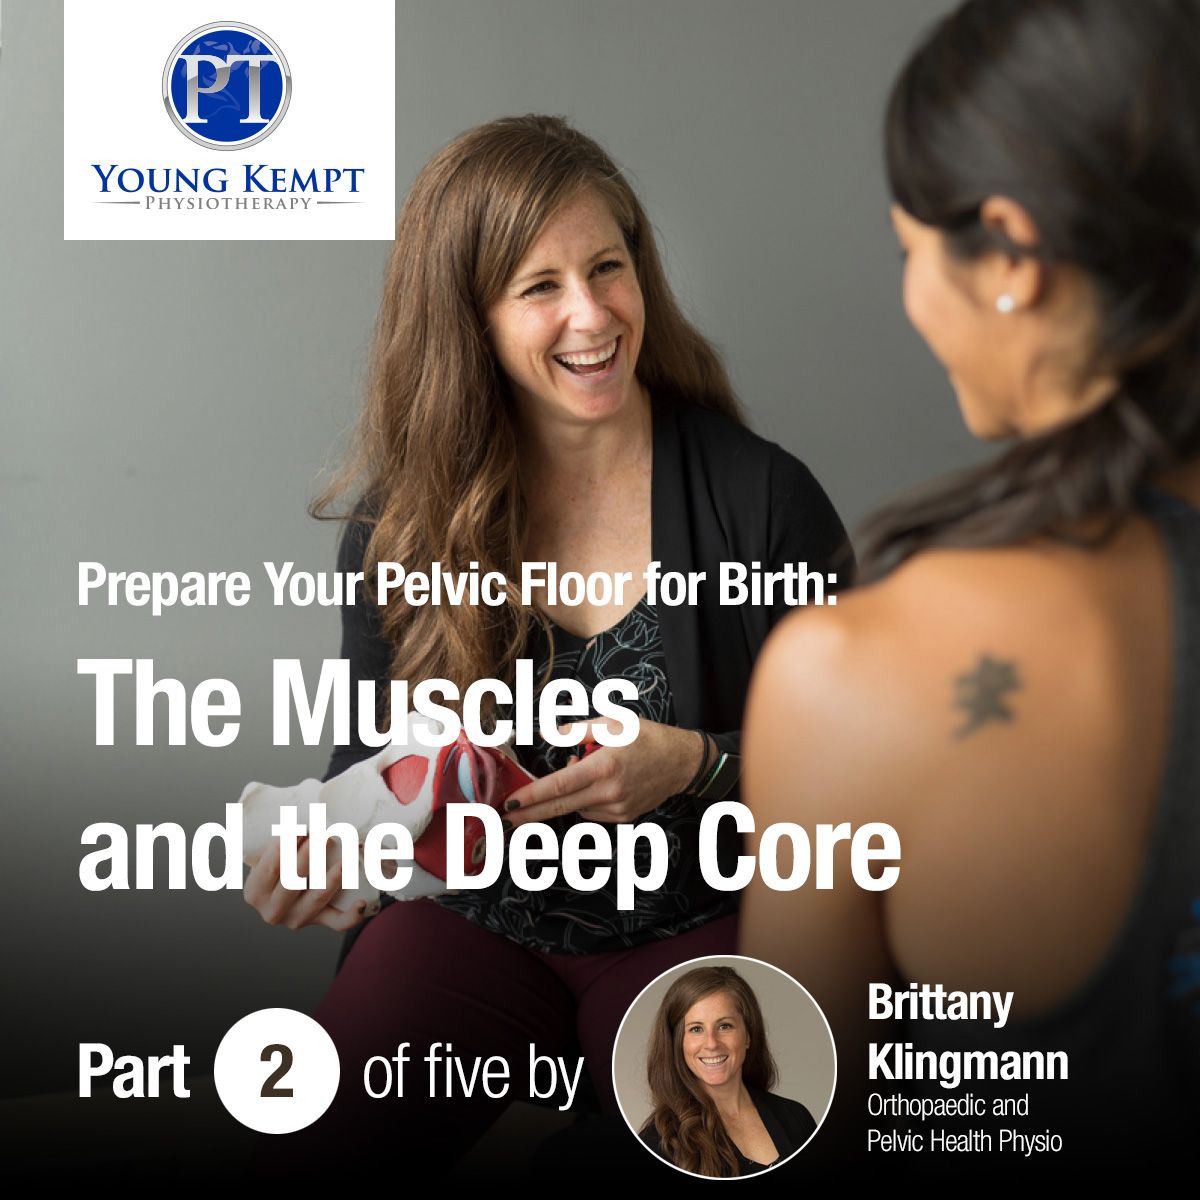 Prepare Your Pelvic Floor for Birth: The Muscles and the Deep Core